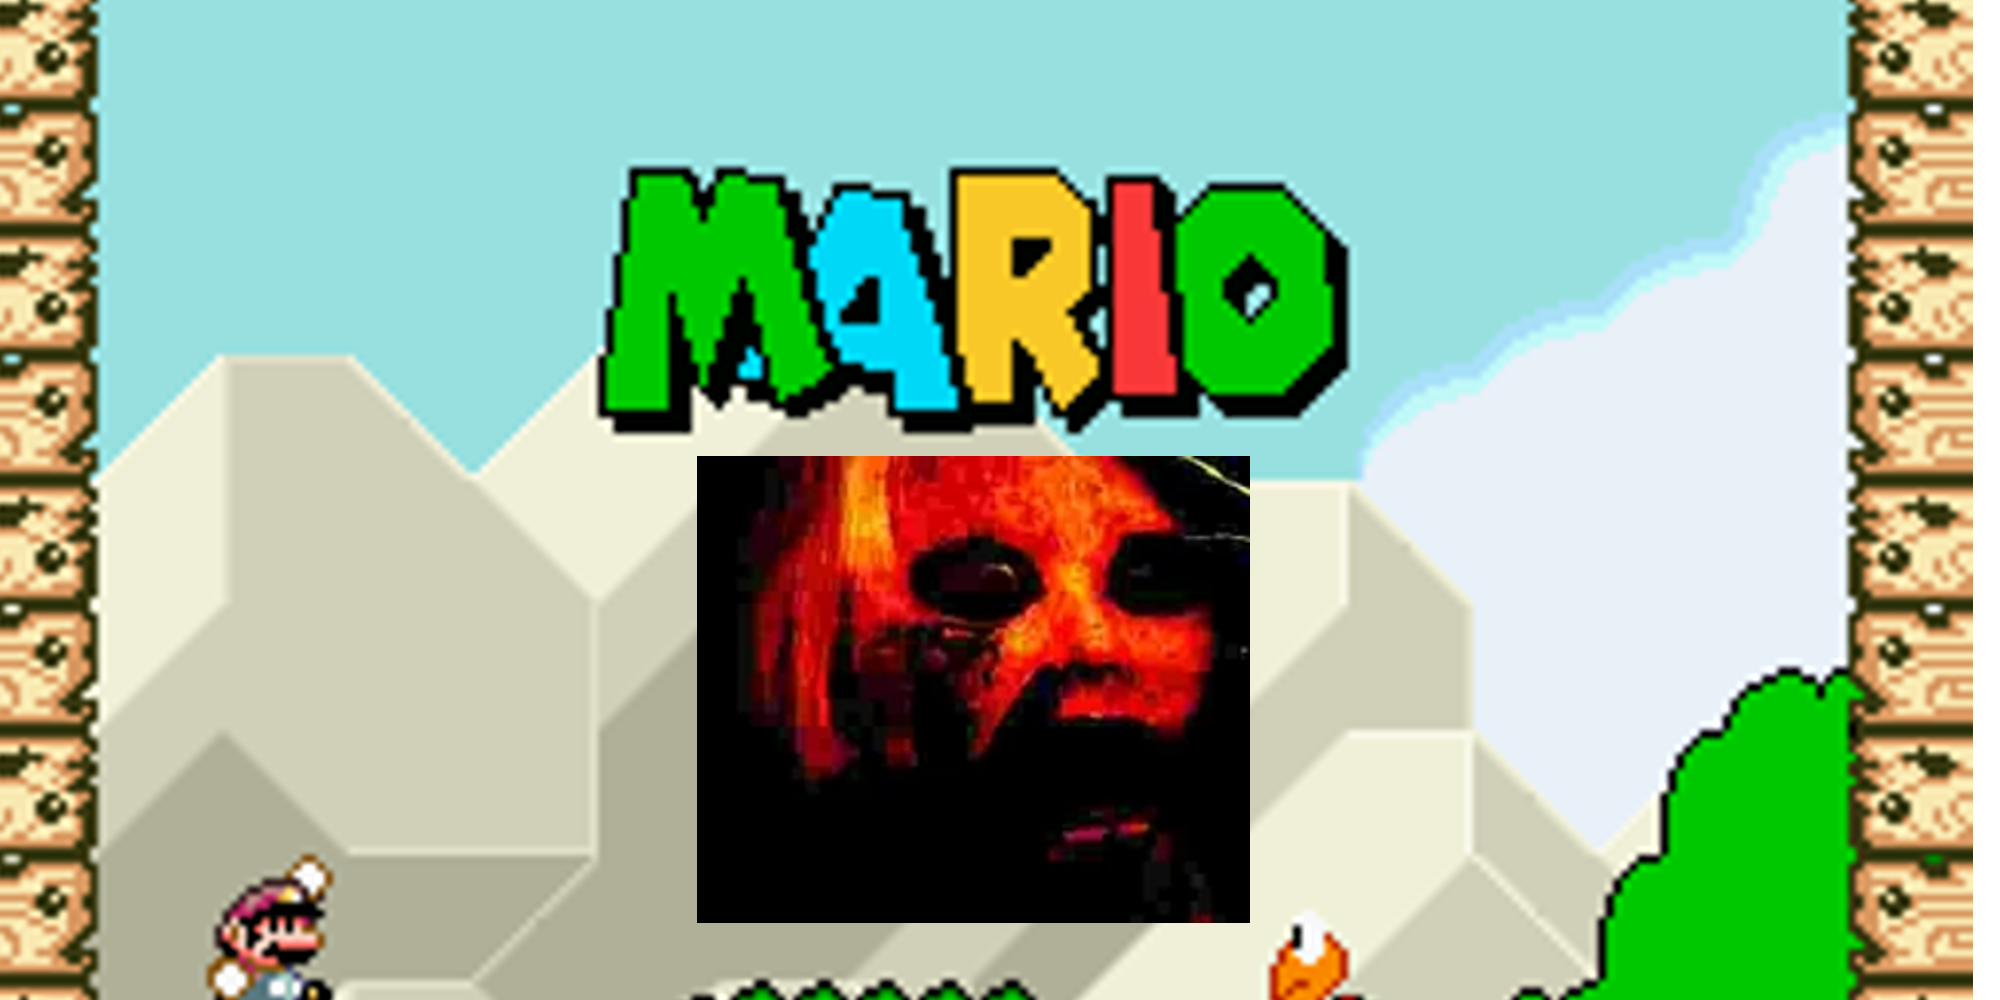 the MARIO ROM hack with the jpg. image conversion